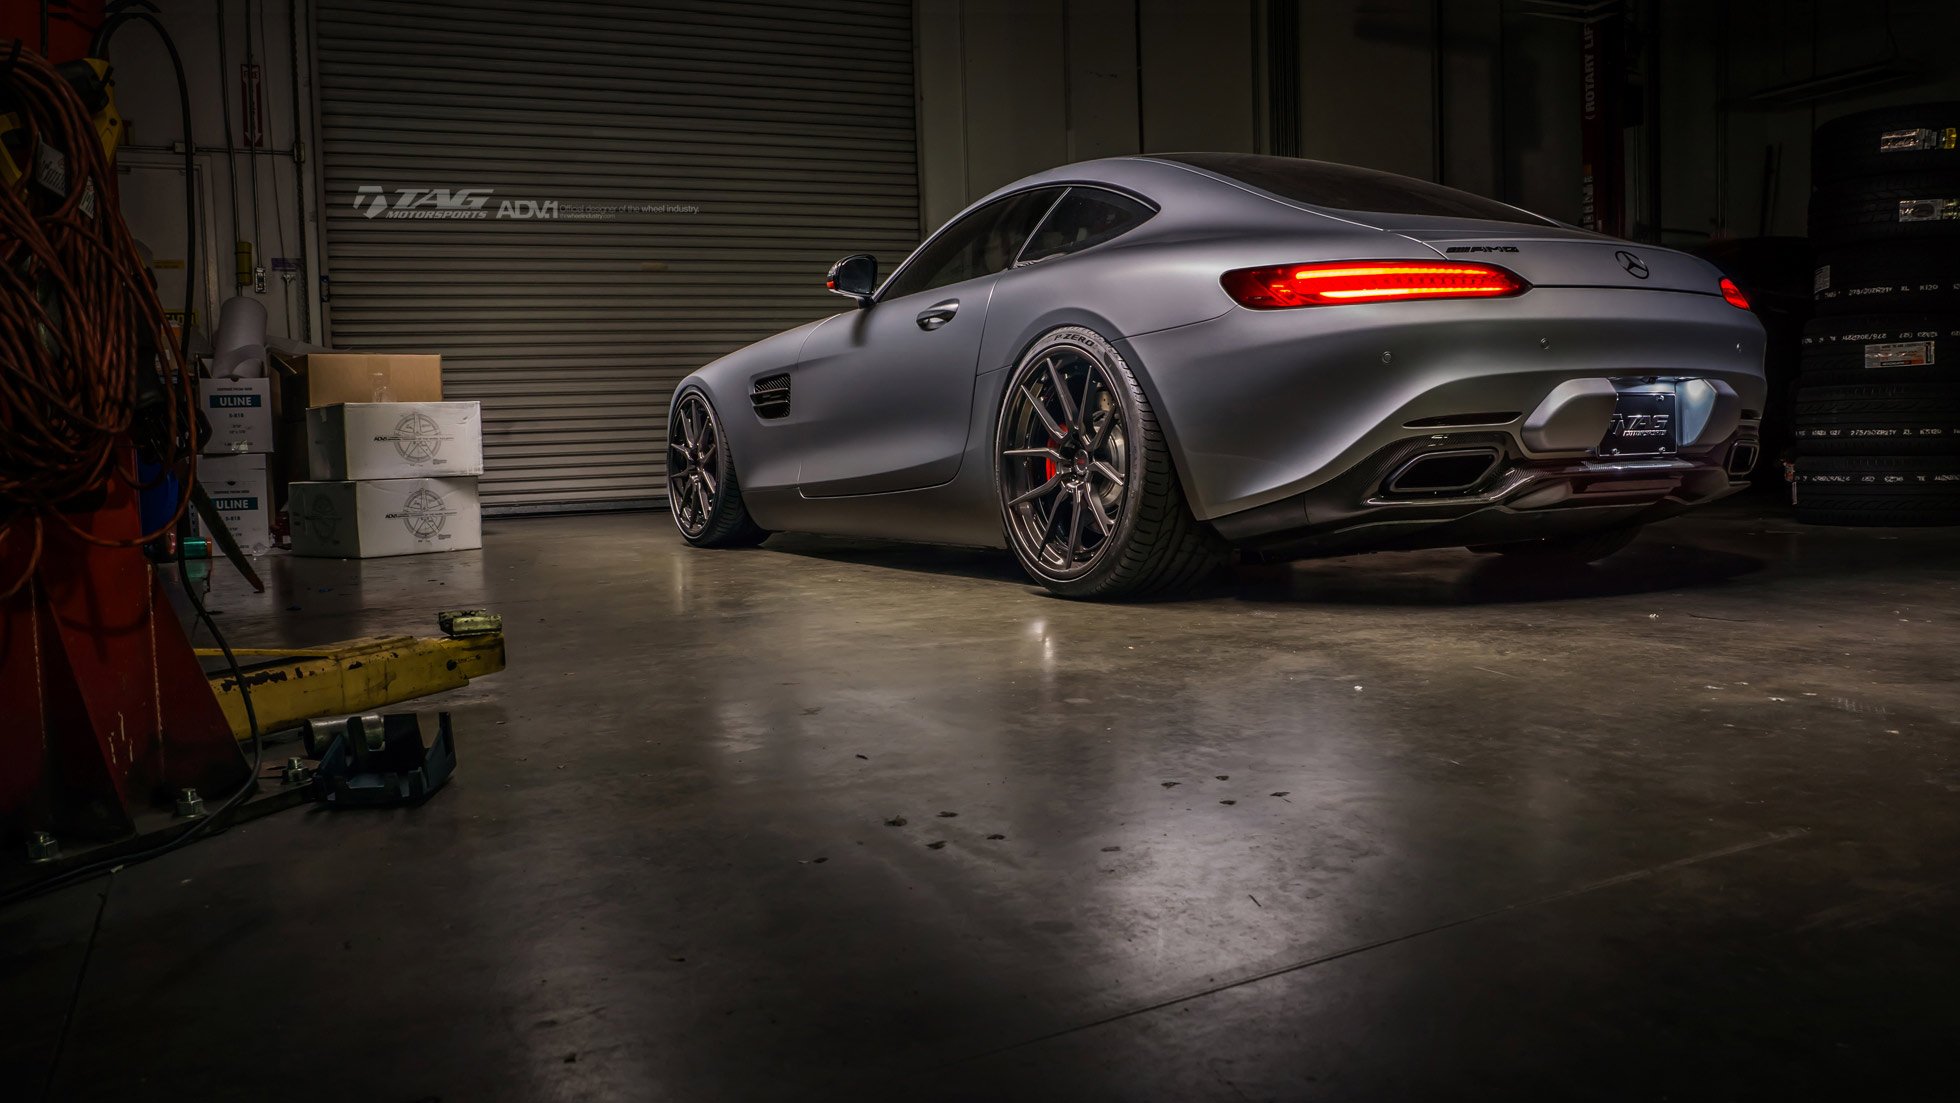 mercedes, Benz, Amg, Gt s, Adv1, Wheels, Coupe, Cars Wallpaper